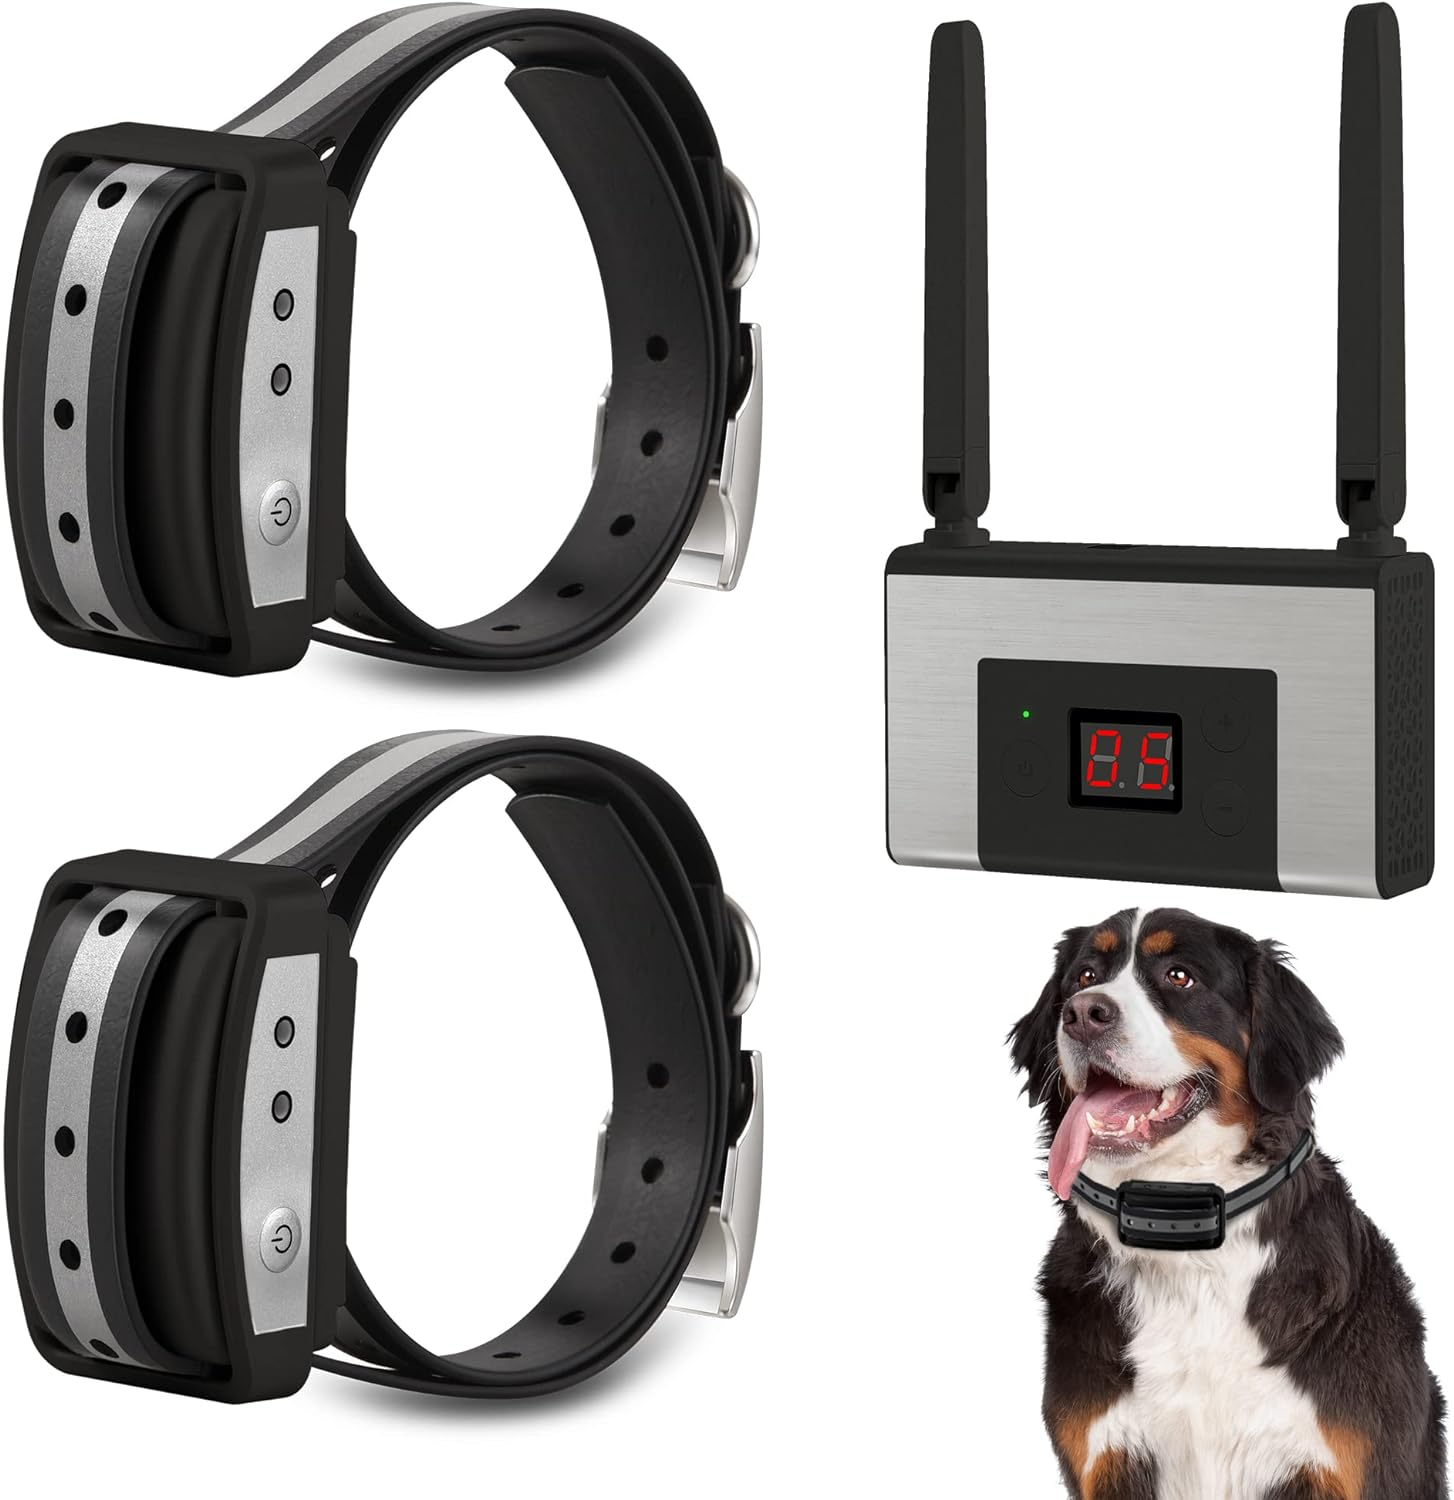 FOCUSER Electric Wireless Dog Fence System, Pet Containment System for 2 Dogs and Pets with Waterproof and Rechargeable Collar Receiver for 2 Dog Container Boundary System (Black)